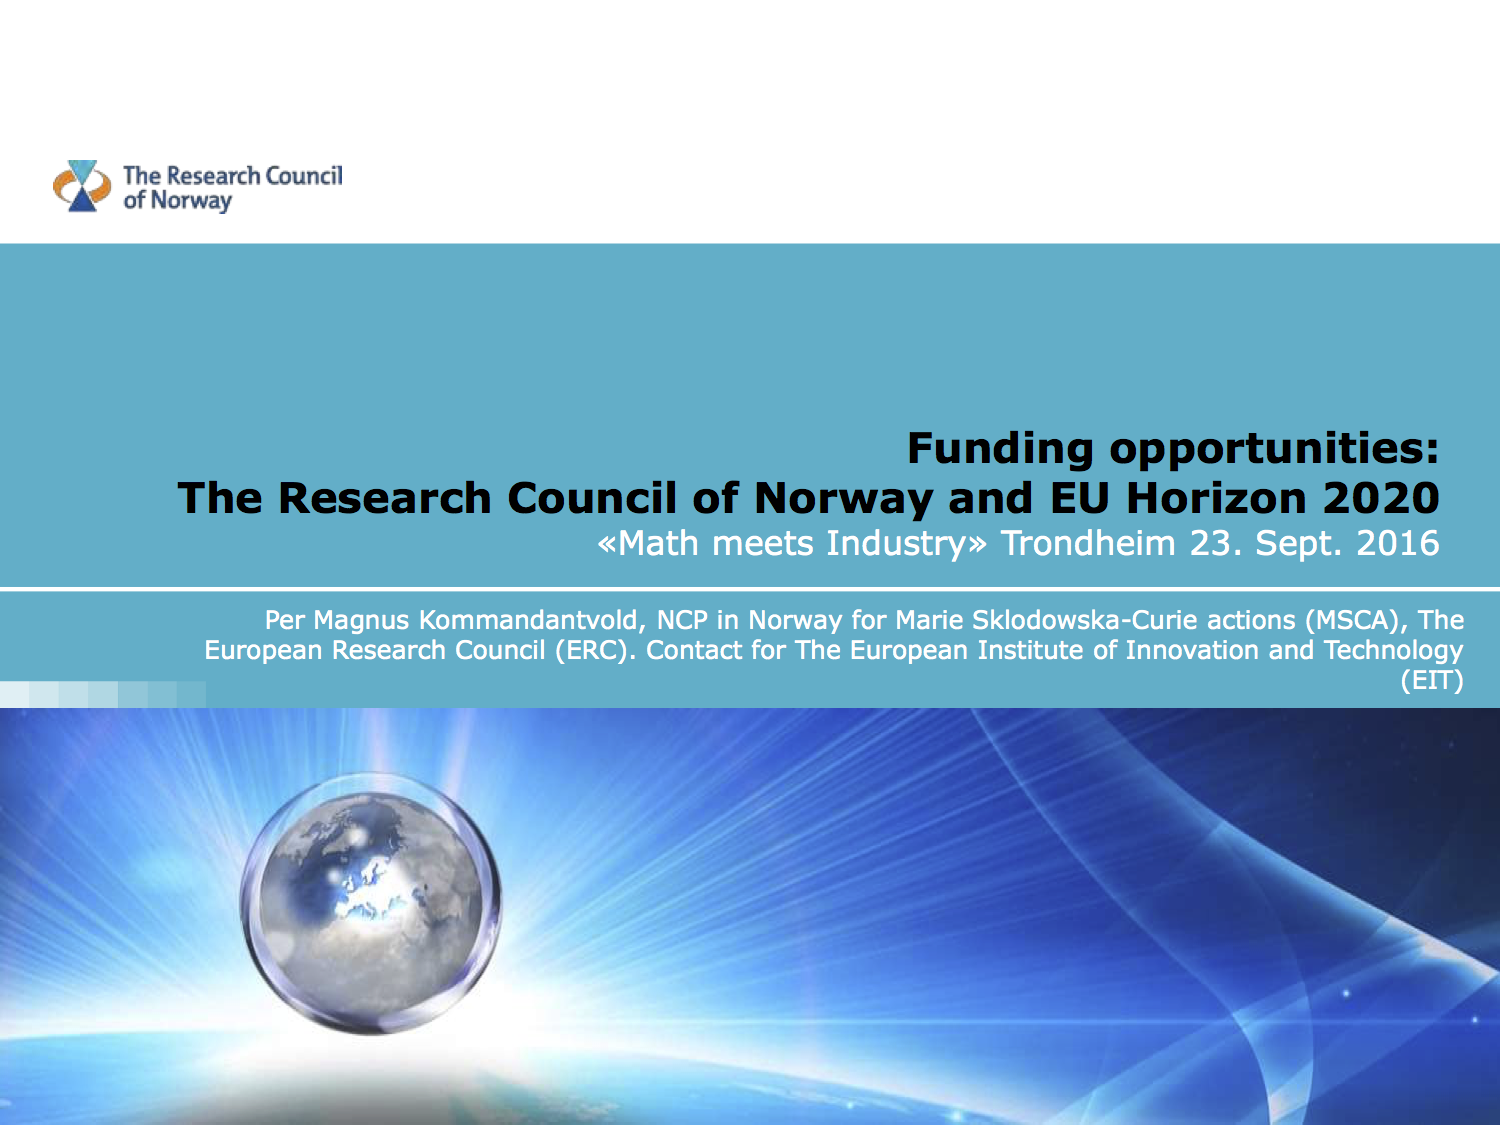 Funding opportunities: The Research Council of Norway and EU Horizon 2020.